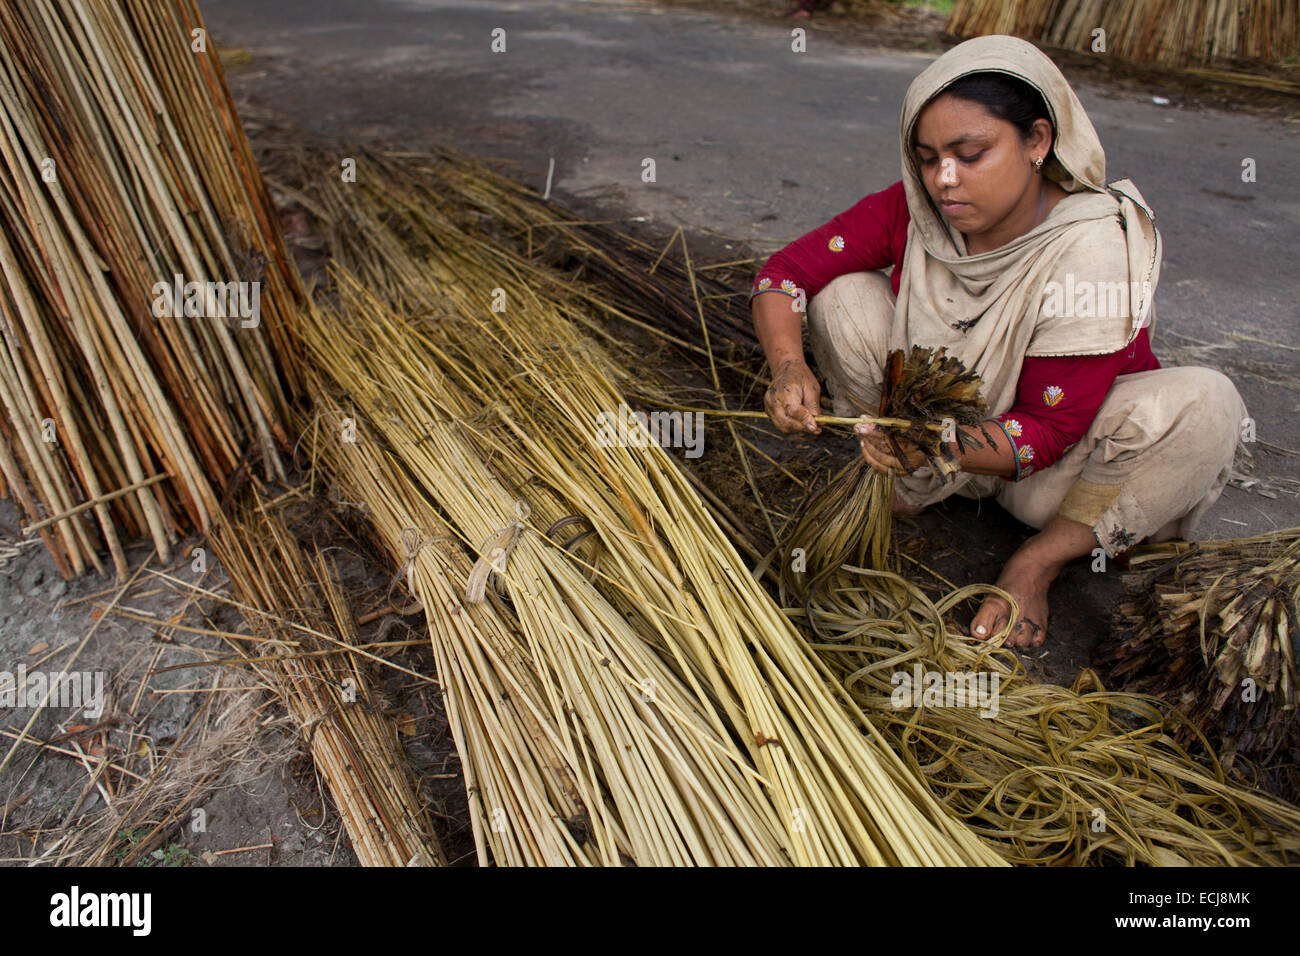 Young women processing jute from jute plants. Jute in Bangladesh is called 'The Golden Fiber'is used for exporting jute products.Bangladesh is the world's largest producer of jute, a fibrous substance used in making burlap, sacks, mats, rope and twine, and carpet backing. Stock Photo